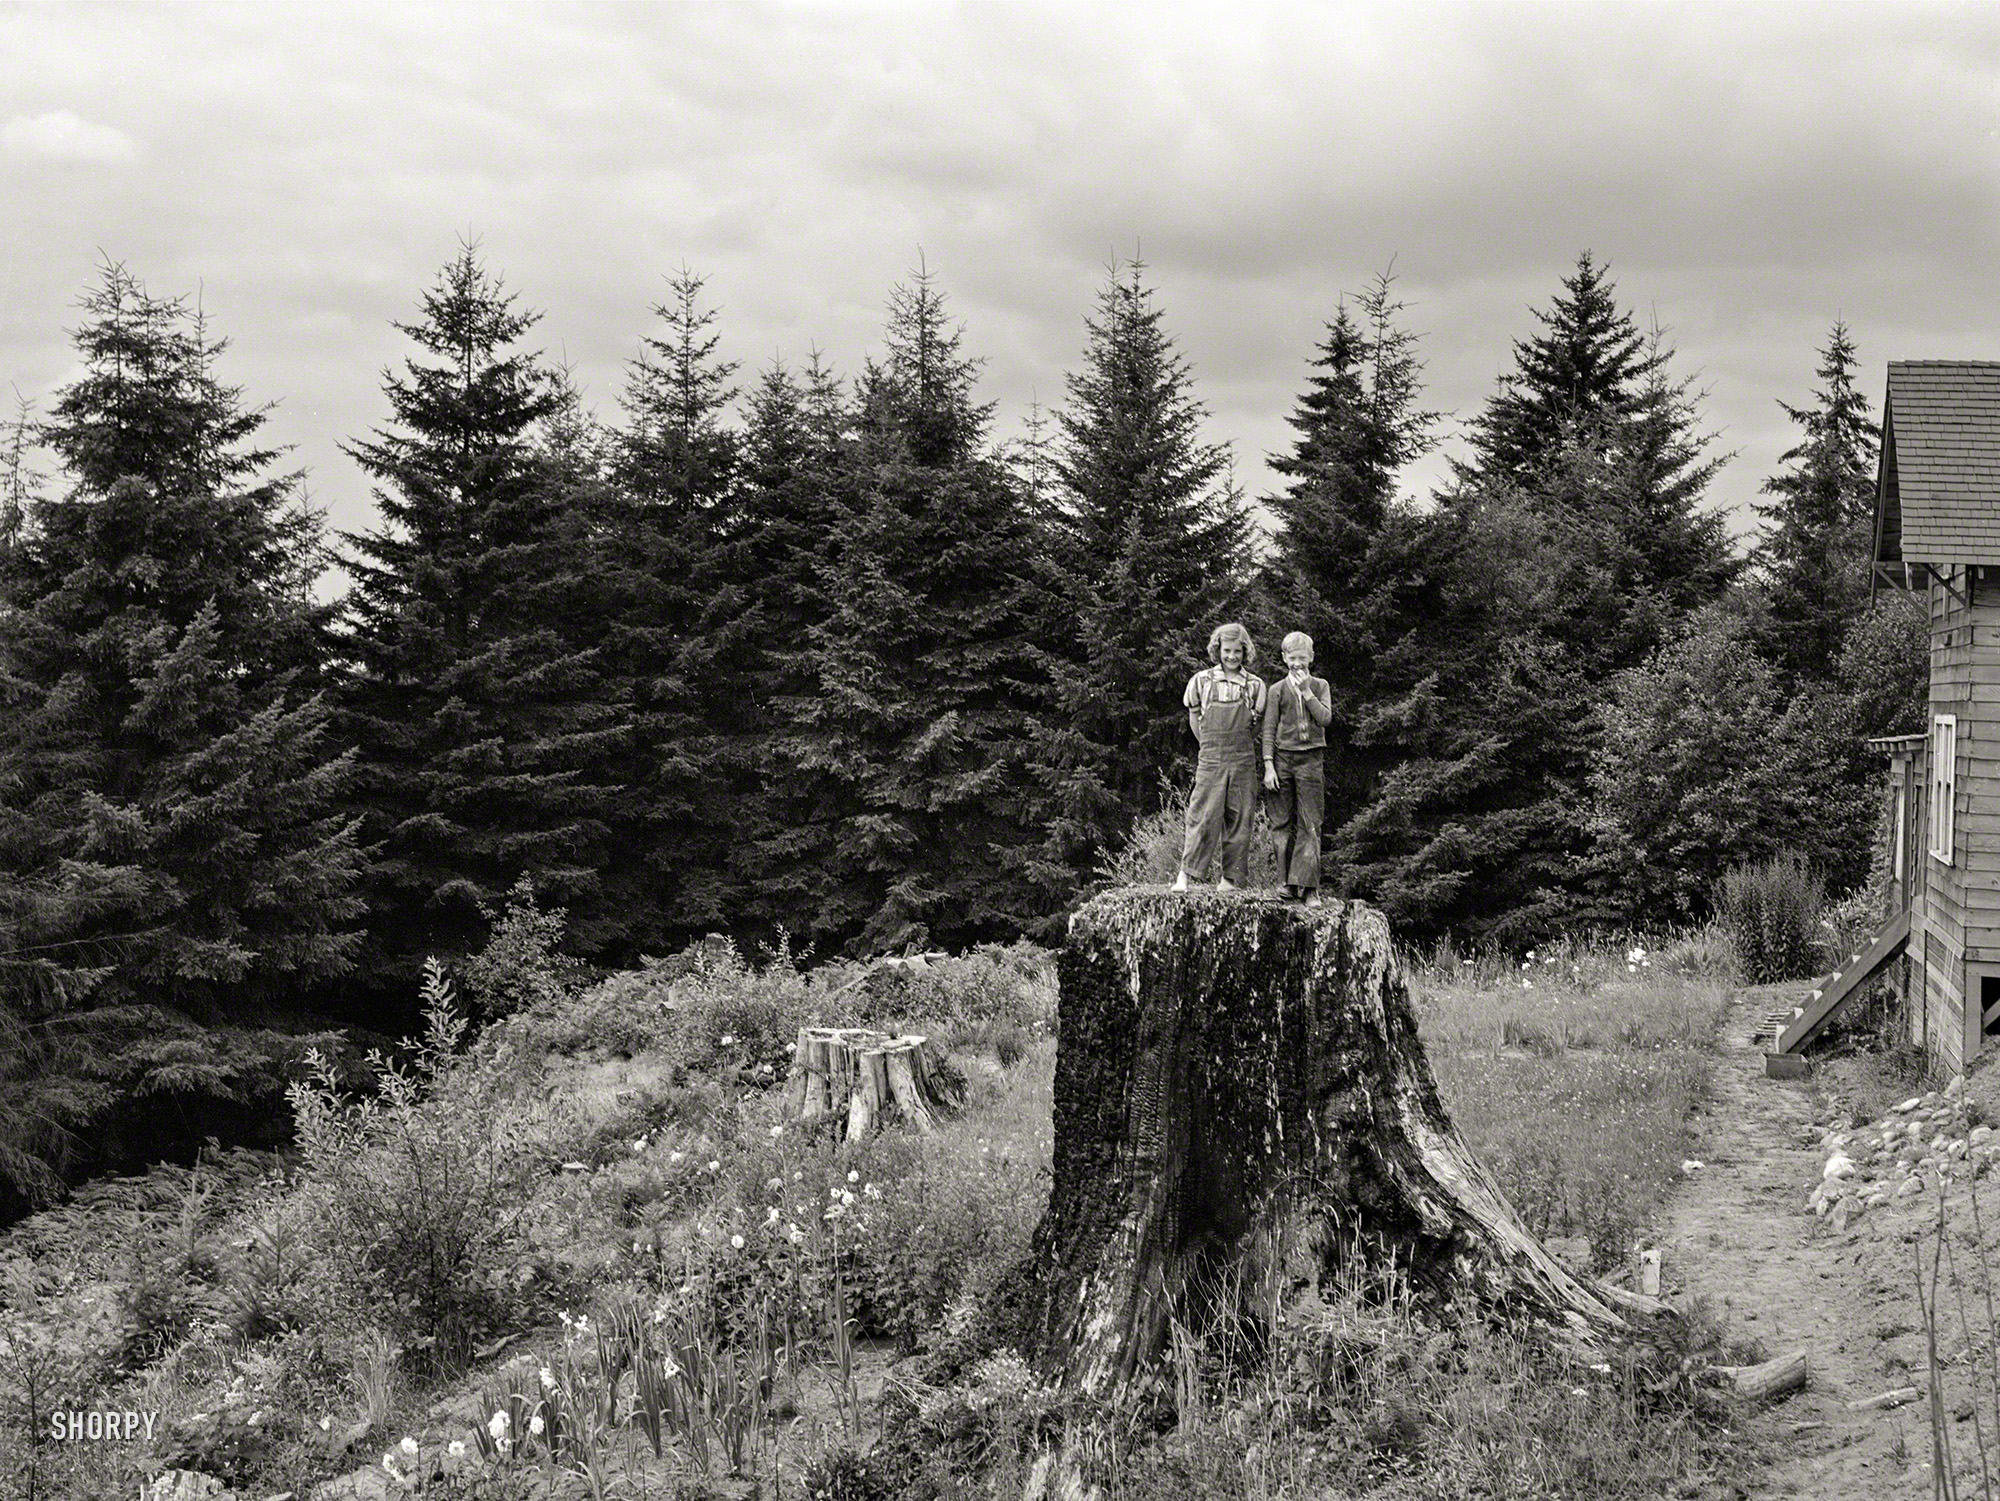 August 1939. "Western Washington subsistence farm, whittled out of the stumps." Photo by Dorothea Lange for the Farm Security Administration. View full size.